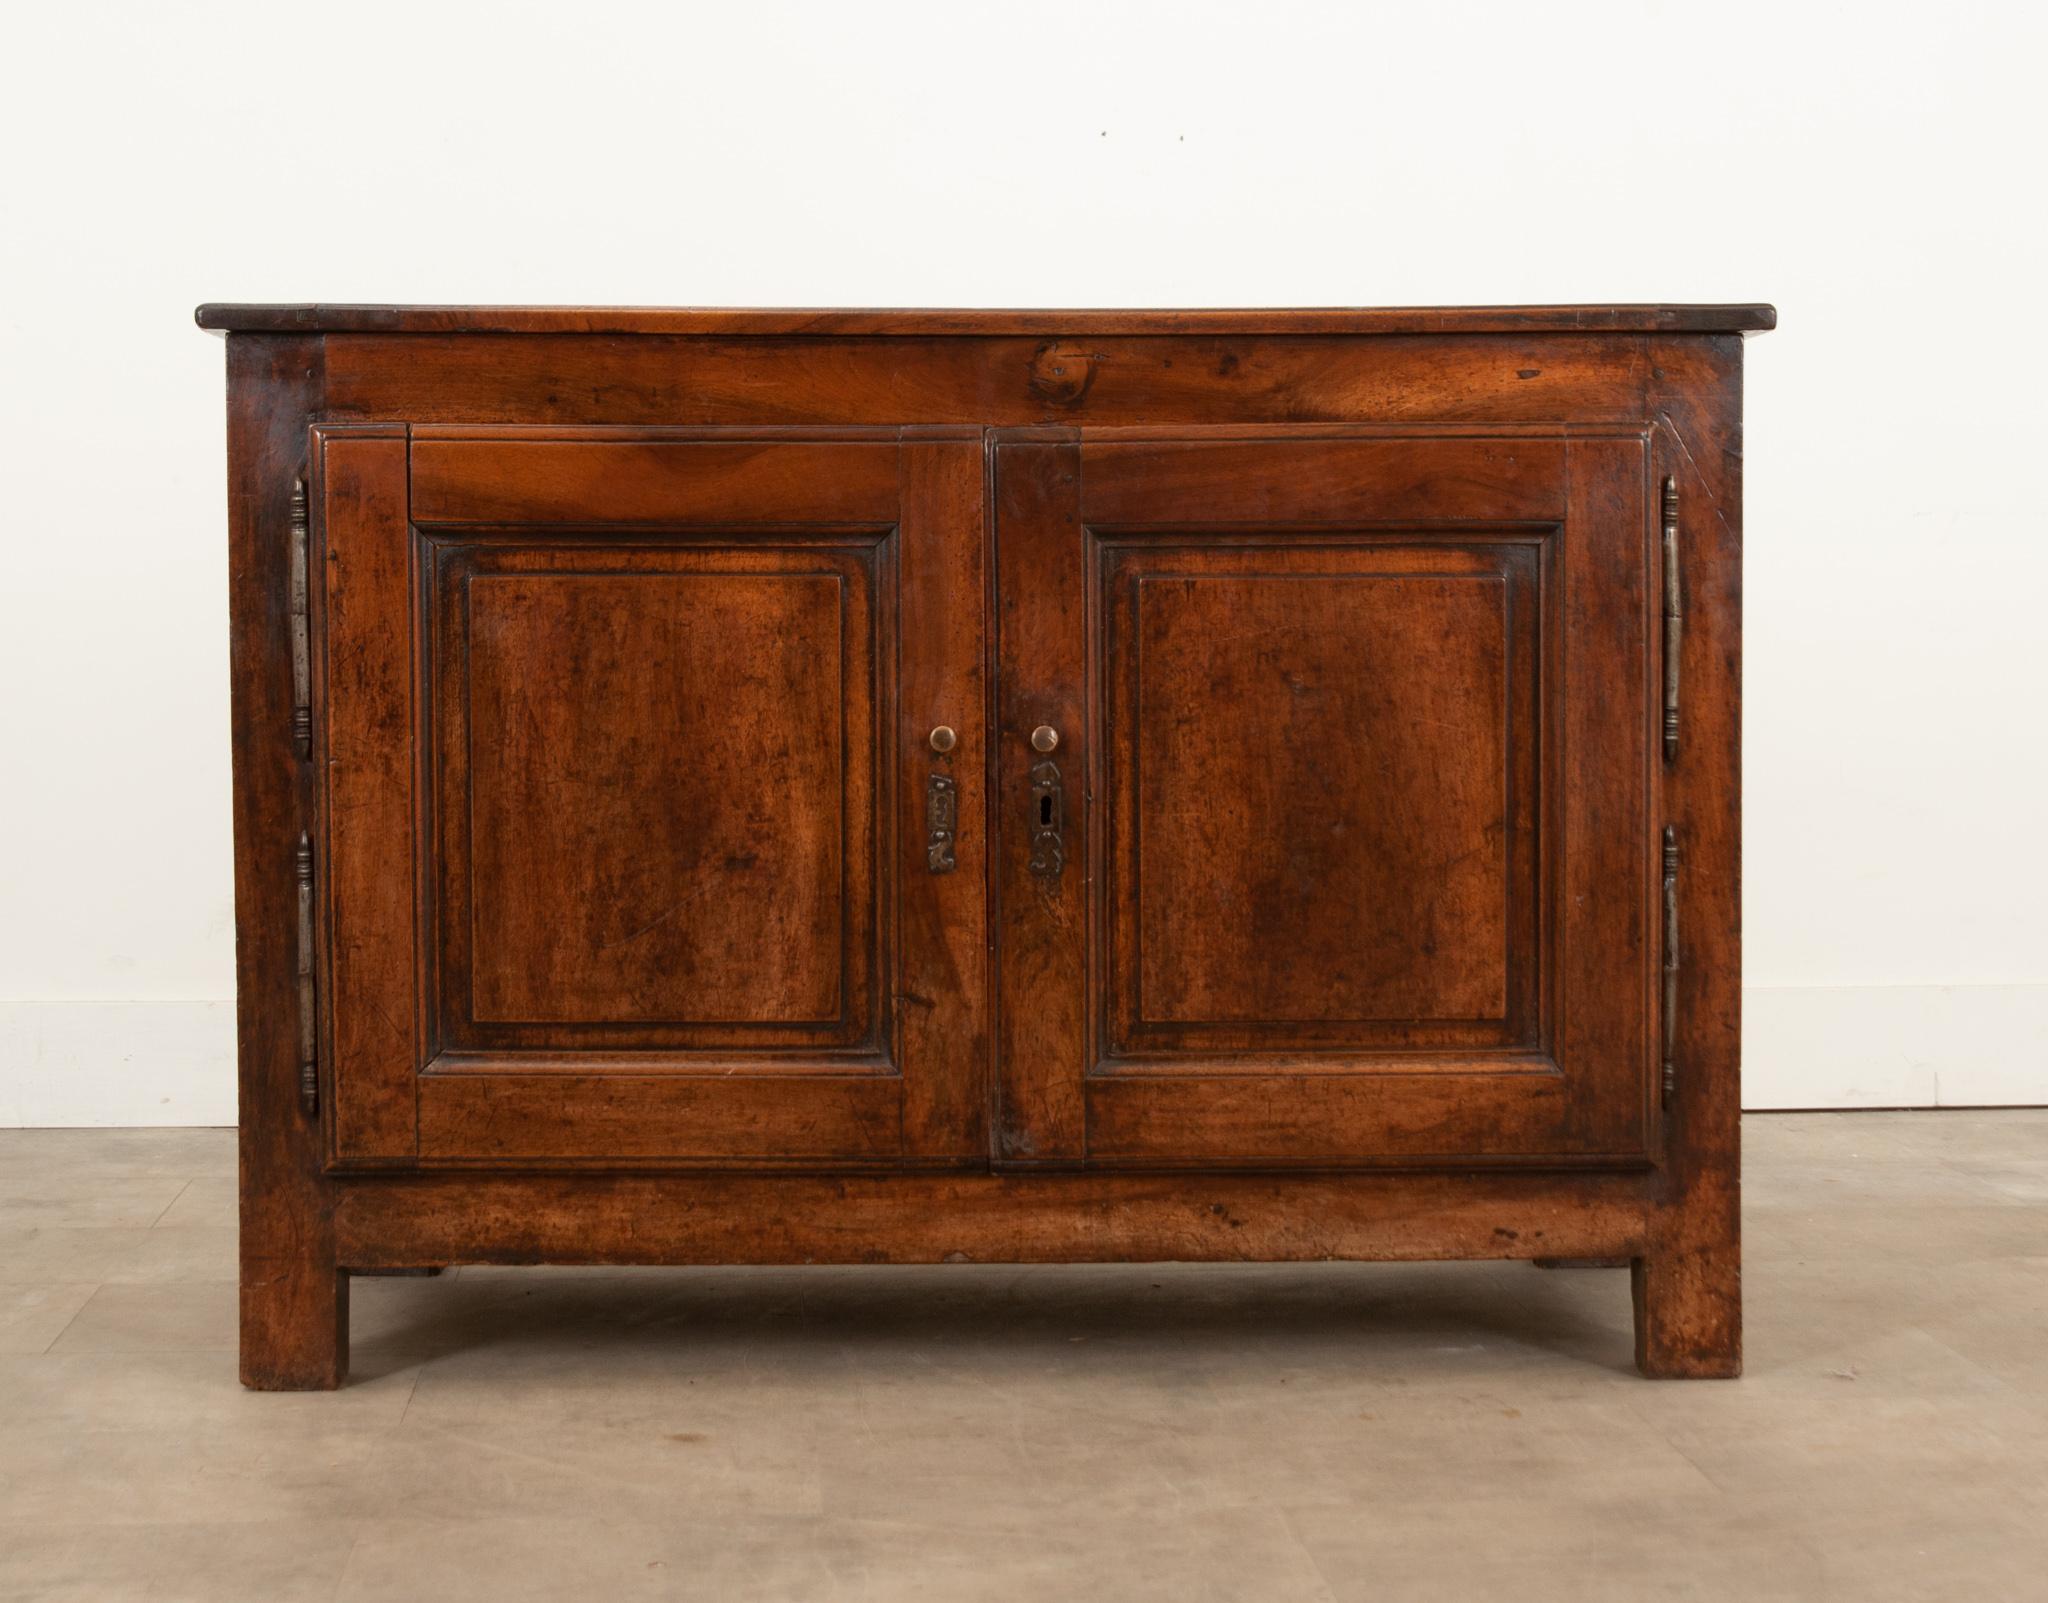 A French 19th century walnut two-door buffet that offers considerable storage space. Hand-crafted in France circa 1850, it features a rectangular top sitting above two impressive doors, adorned with carved recessed panels, elongated double hinges,